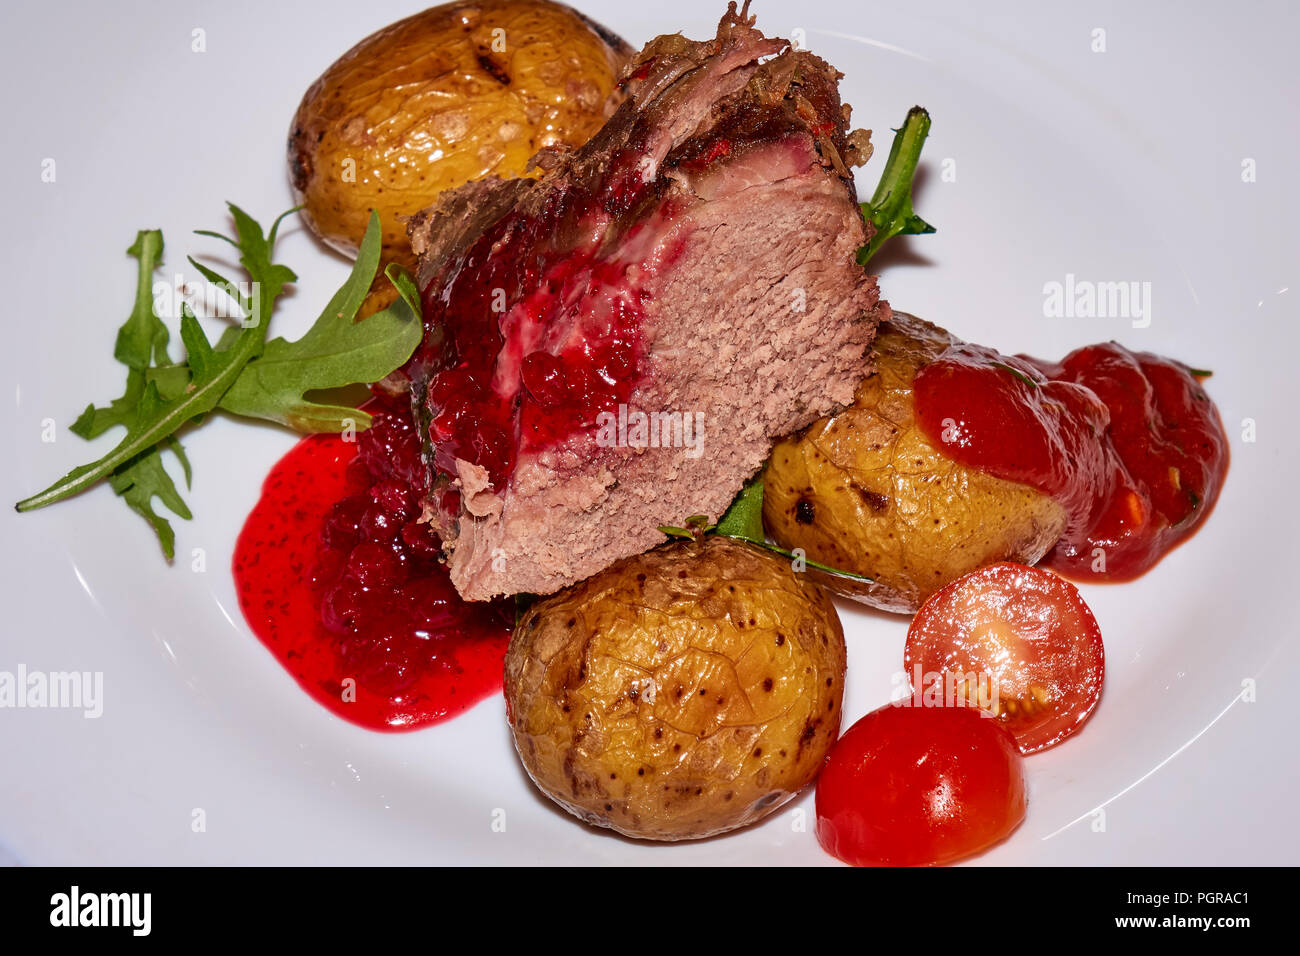 Big peace of the roasted medium well mutton meat with baked potatoes, fresh tomatoes and cowberry sauce on the white plate Stock Photo